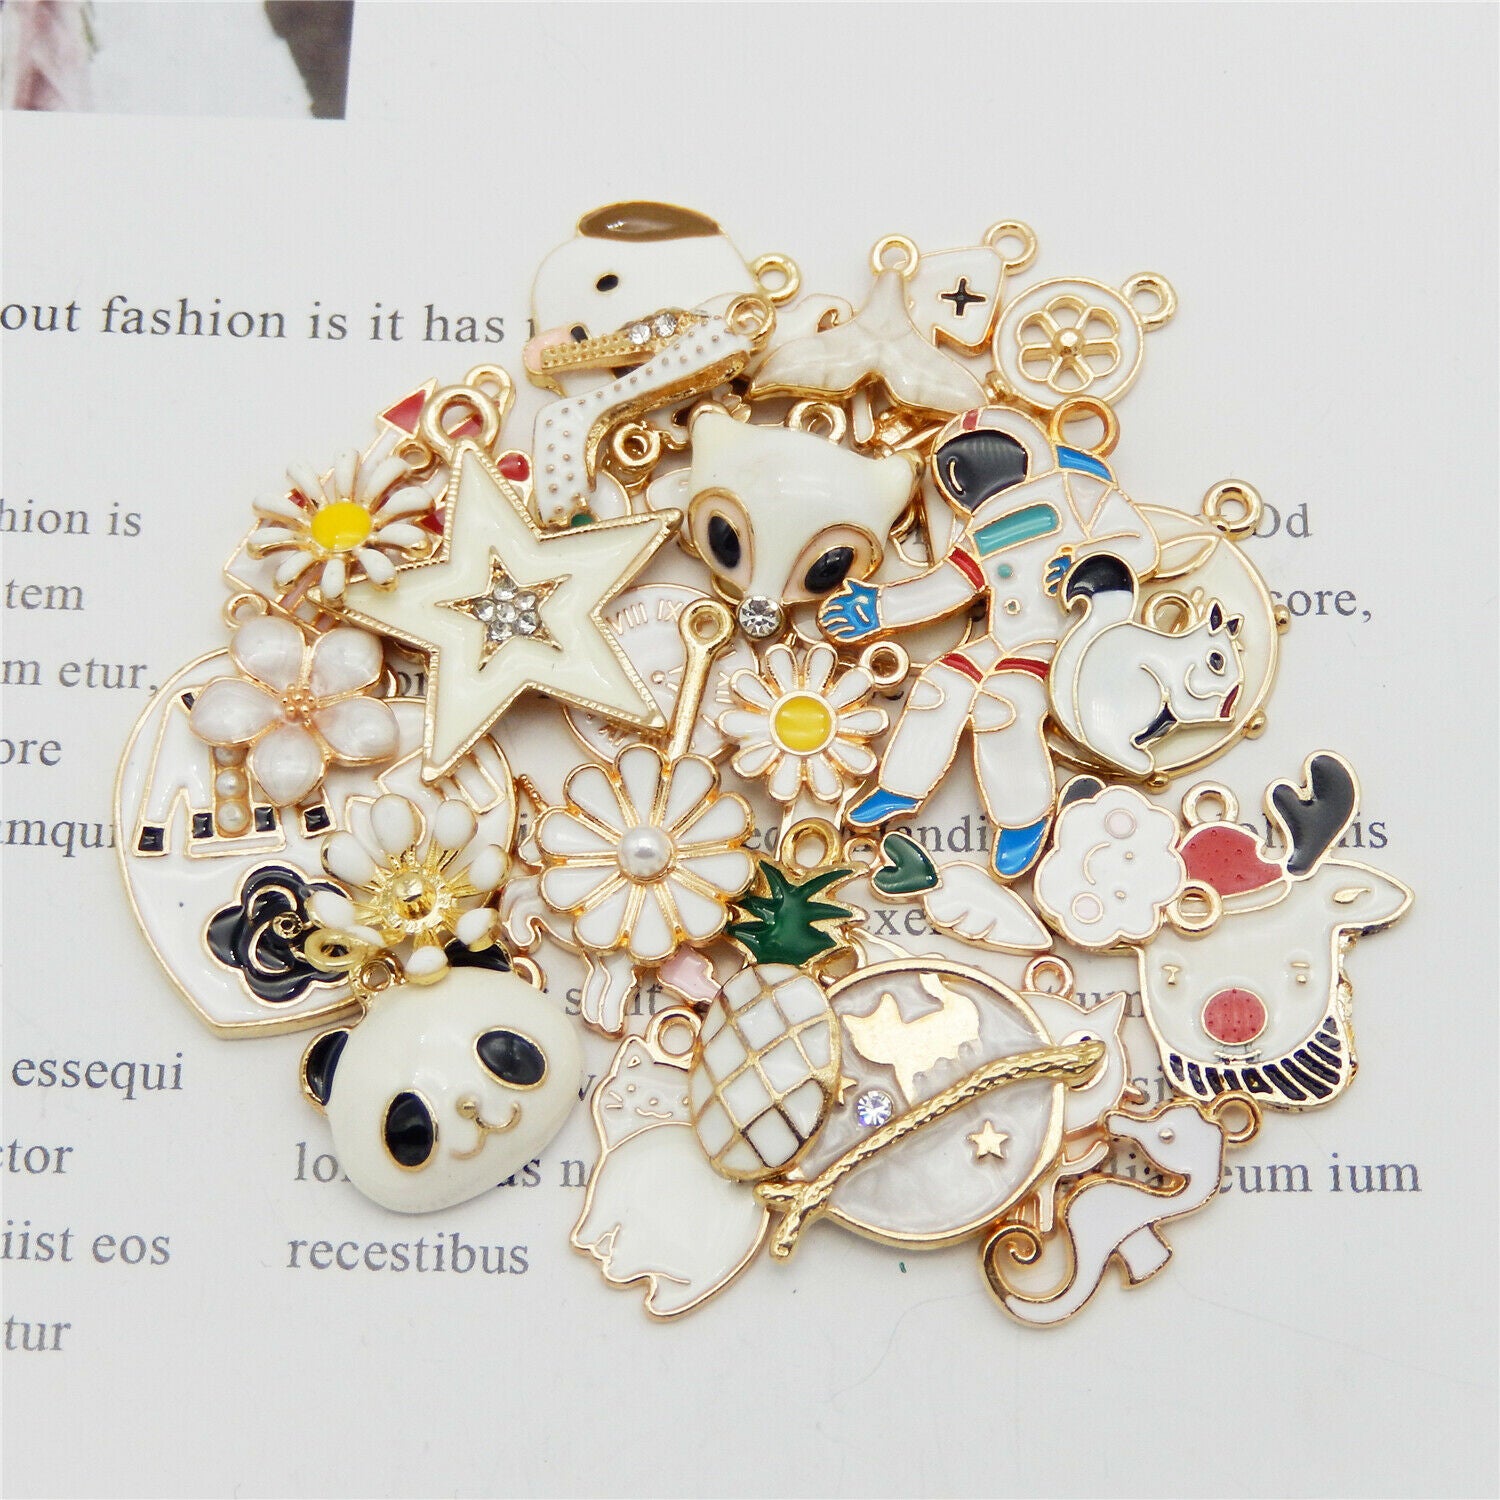 10 Mix White Enamel Charm Alloy For Craft Jewelry Making Pendant Findings 1-3cm